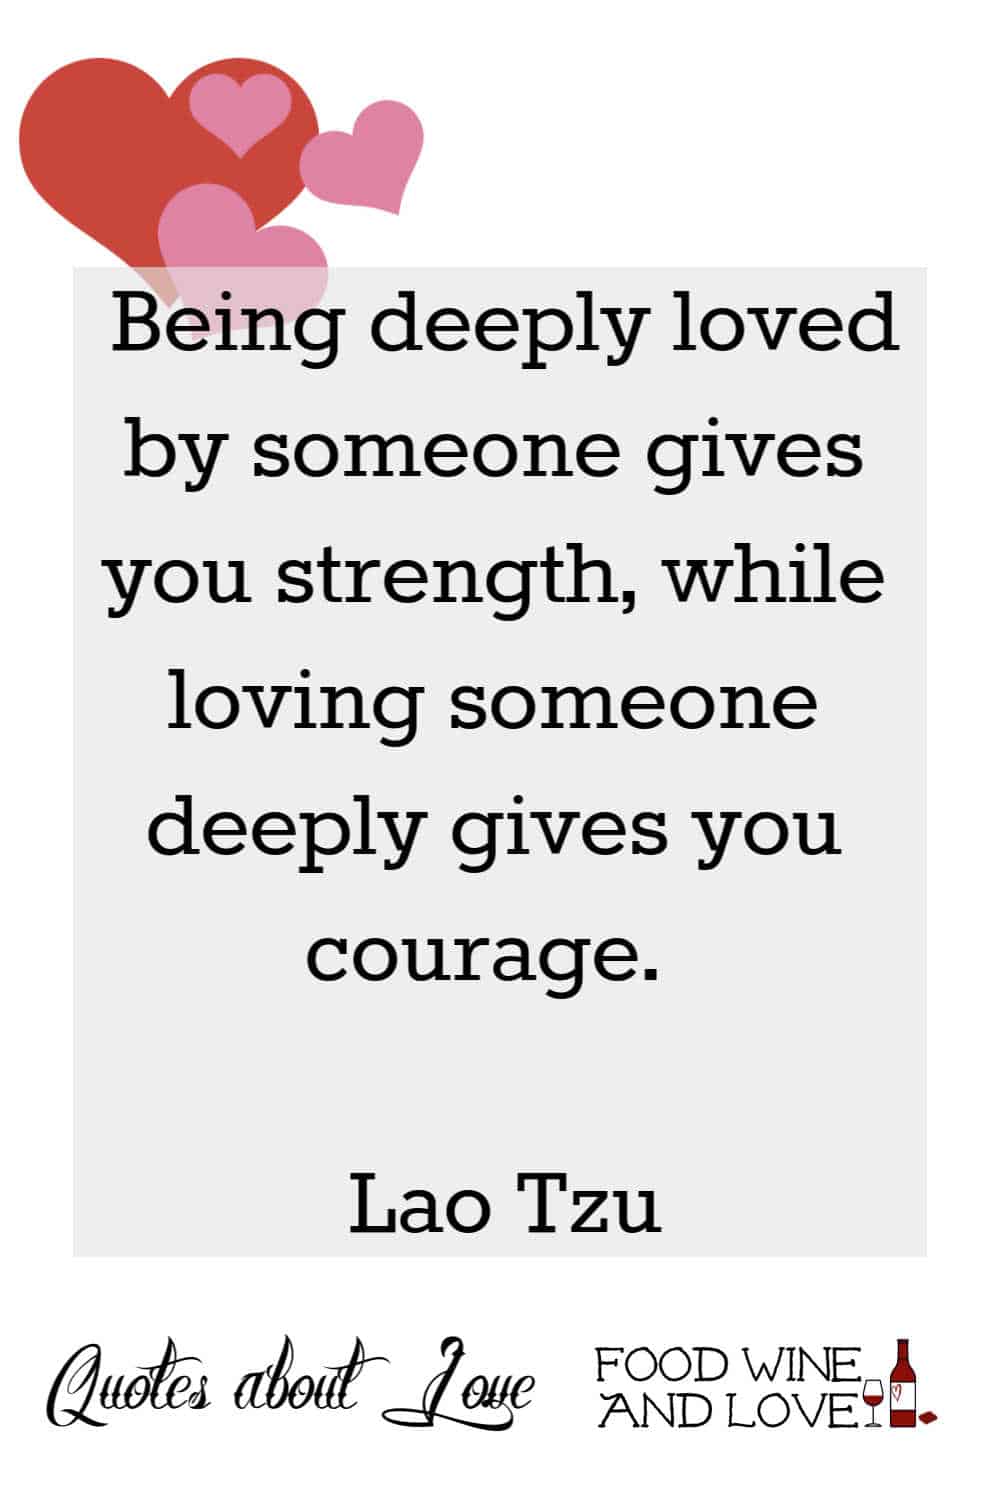  Being deeply loved by someone gives you strength, while loving someone deeply gives you courage.   Lao Tzu